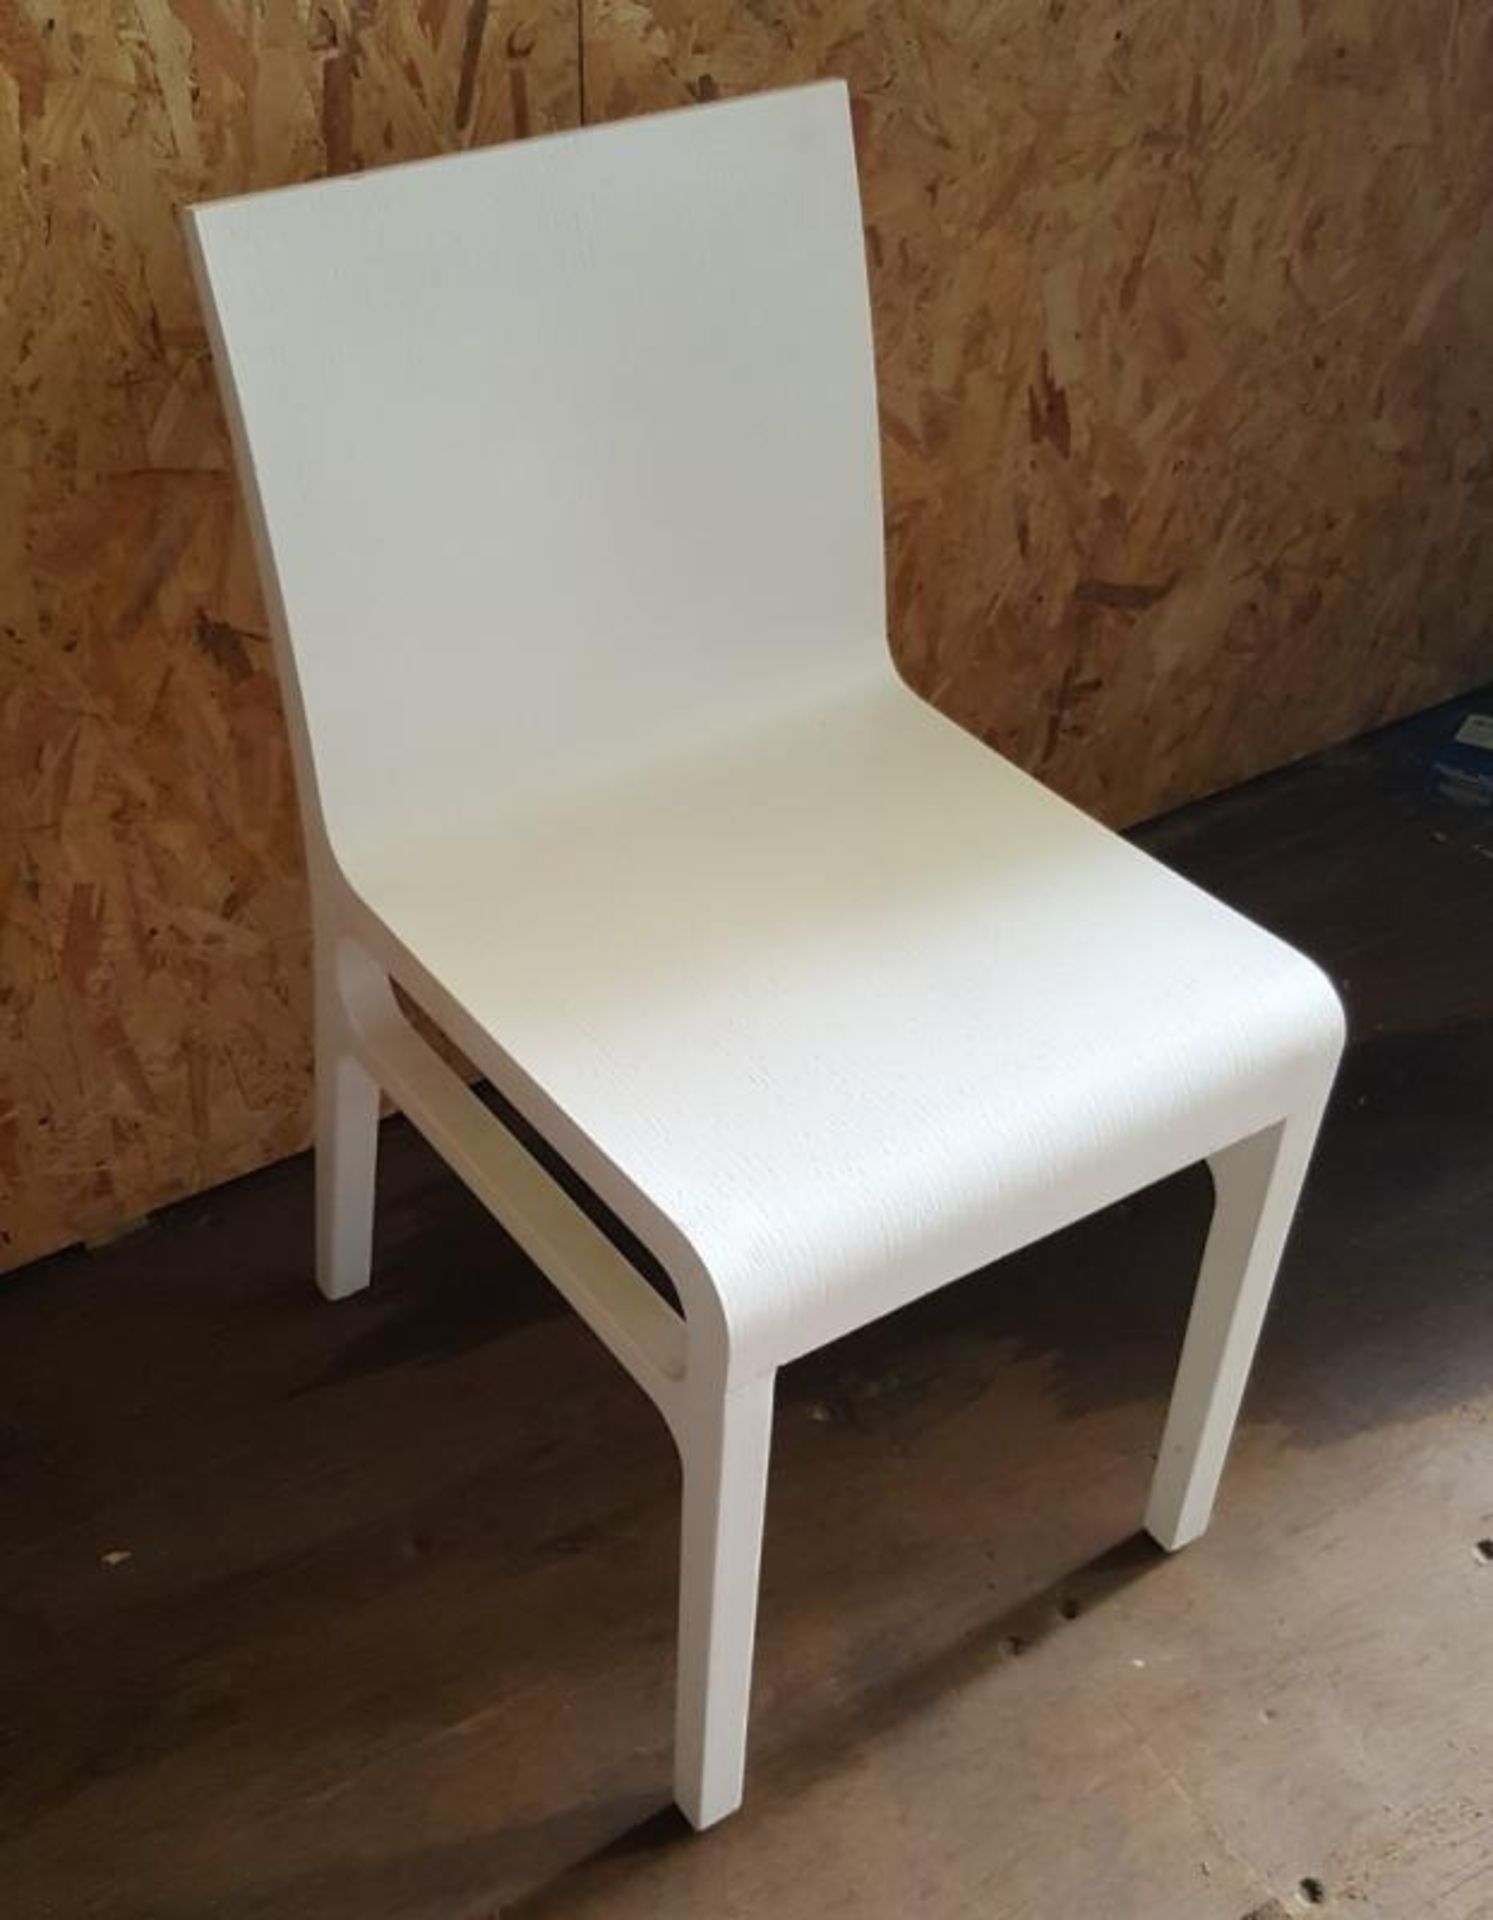 4 x Wooden Dining Chairs Set With A Bright White Finish - Dimensions: Used, In Good Condition - Ref - Image 6 of 6